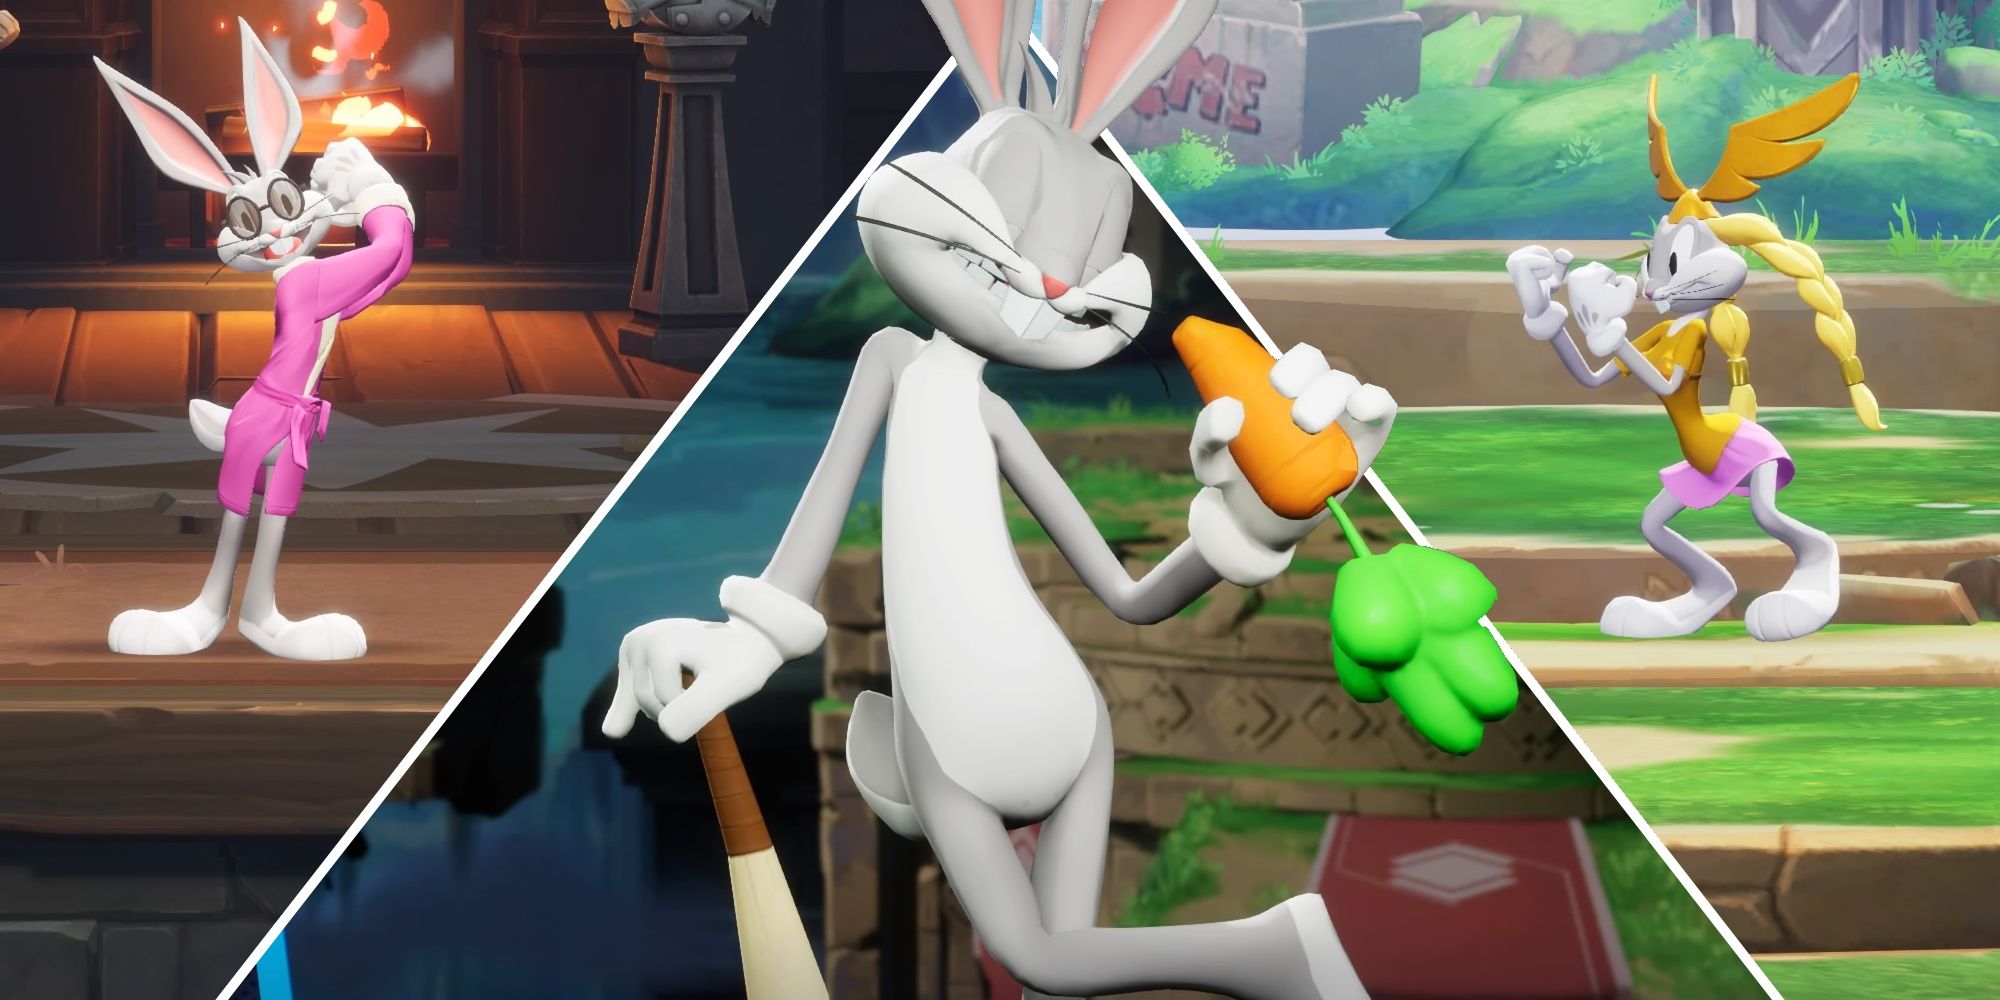 MultiVersus, Bugs Bunny Guide Featured Image